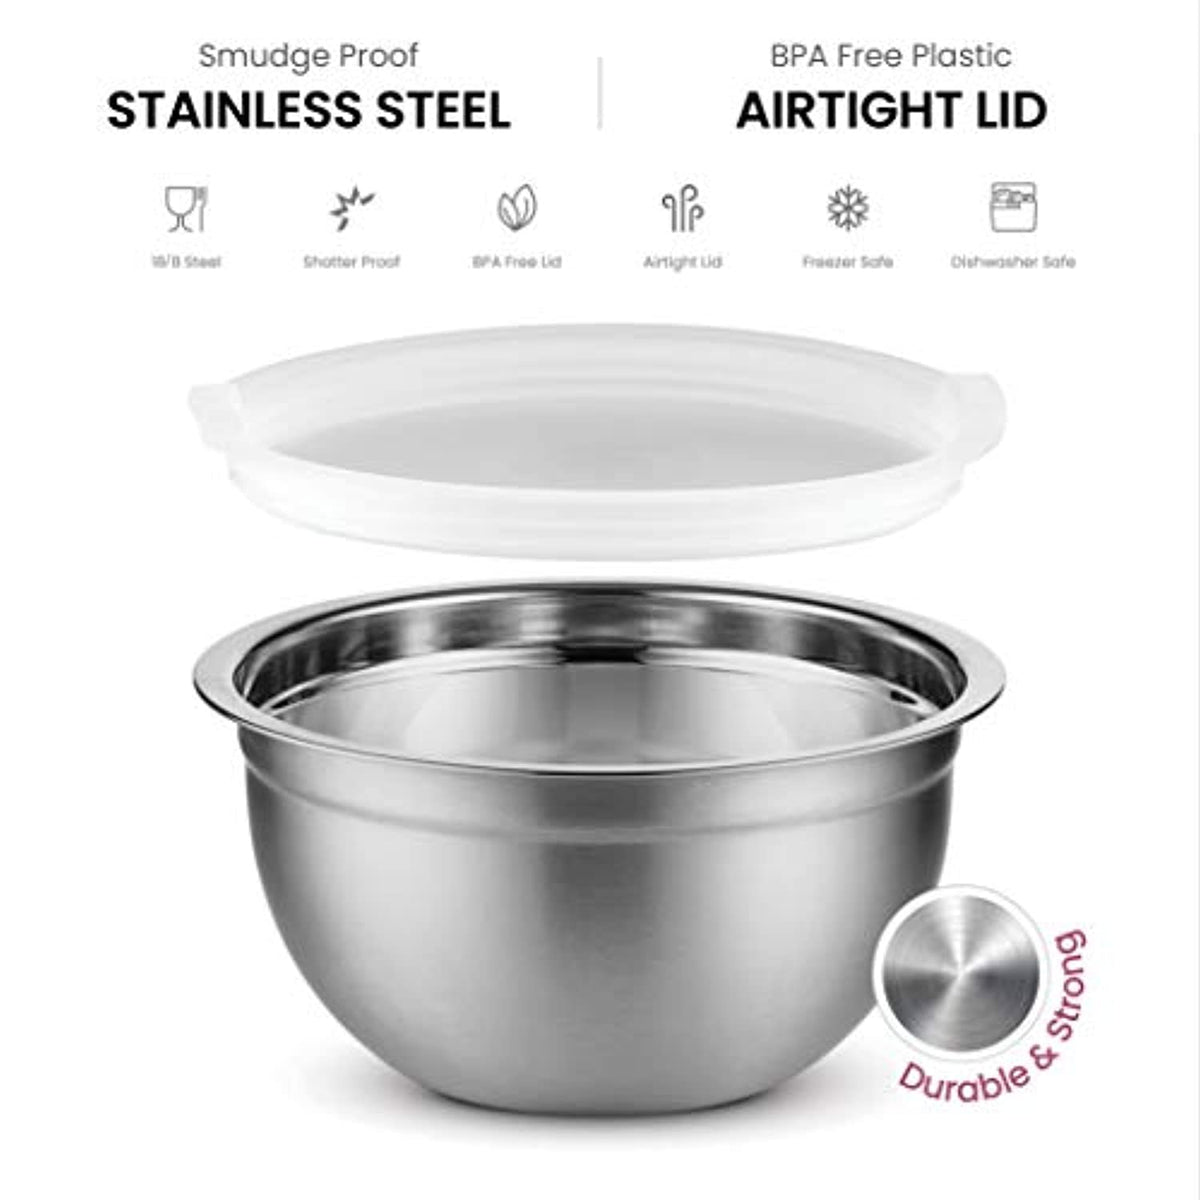 5 Qt. Economy Stainless Steel Mixing Bowl in Mixing Bowls from Simplex  Trading